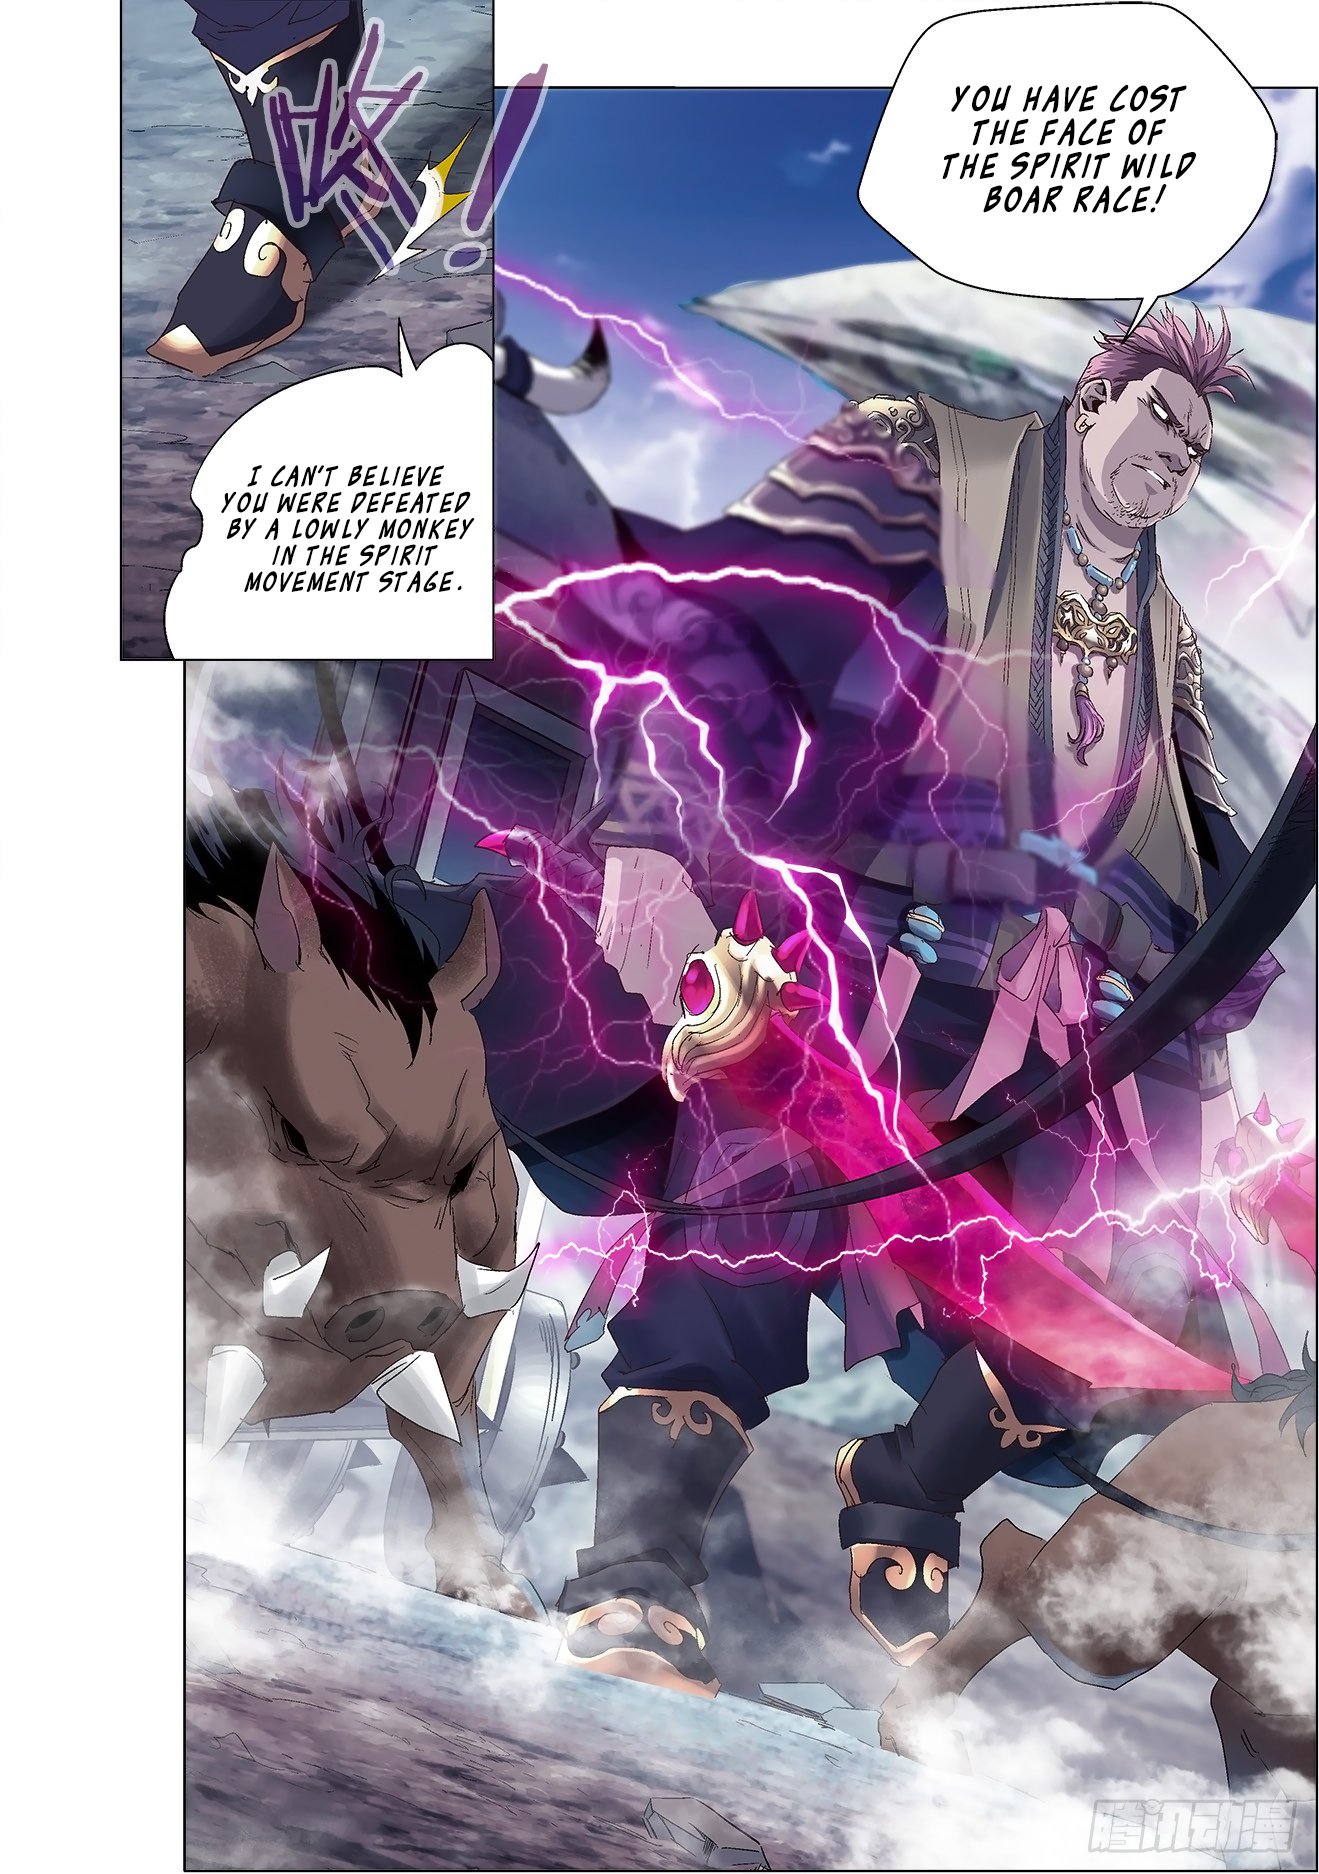 Battle Through The Heavens: Return Of The Beasts Chapter 3.2: Wolf girl Xiao Zhao